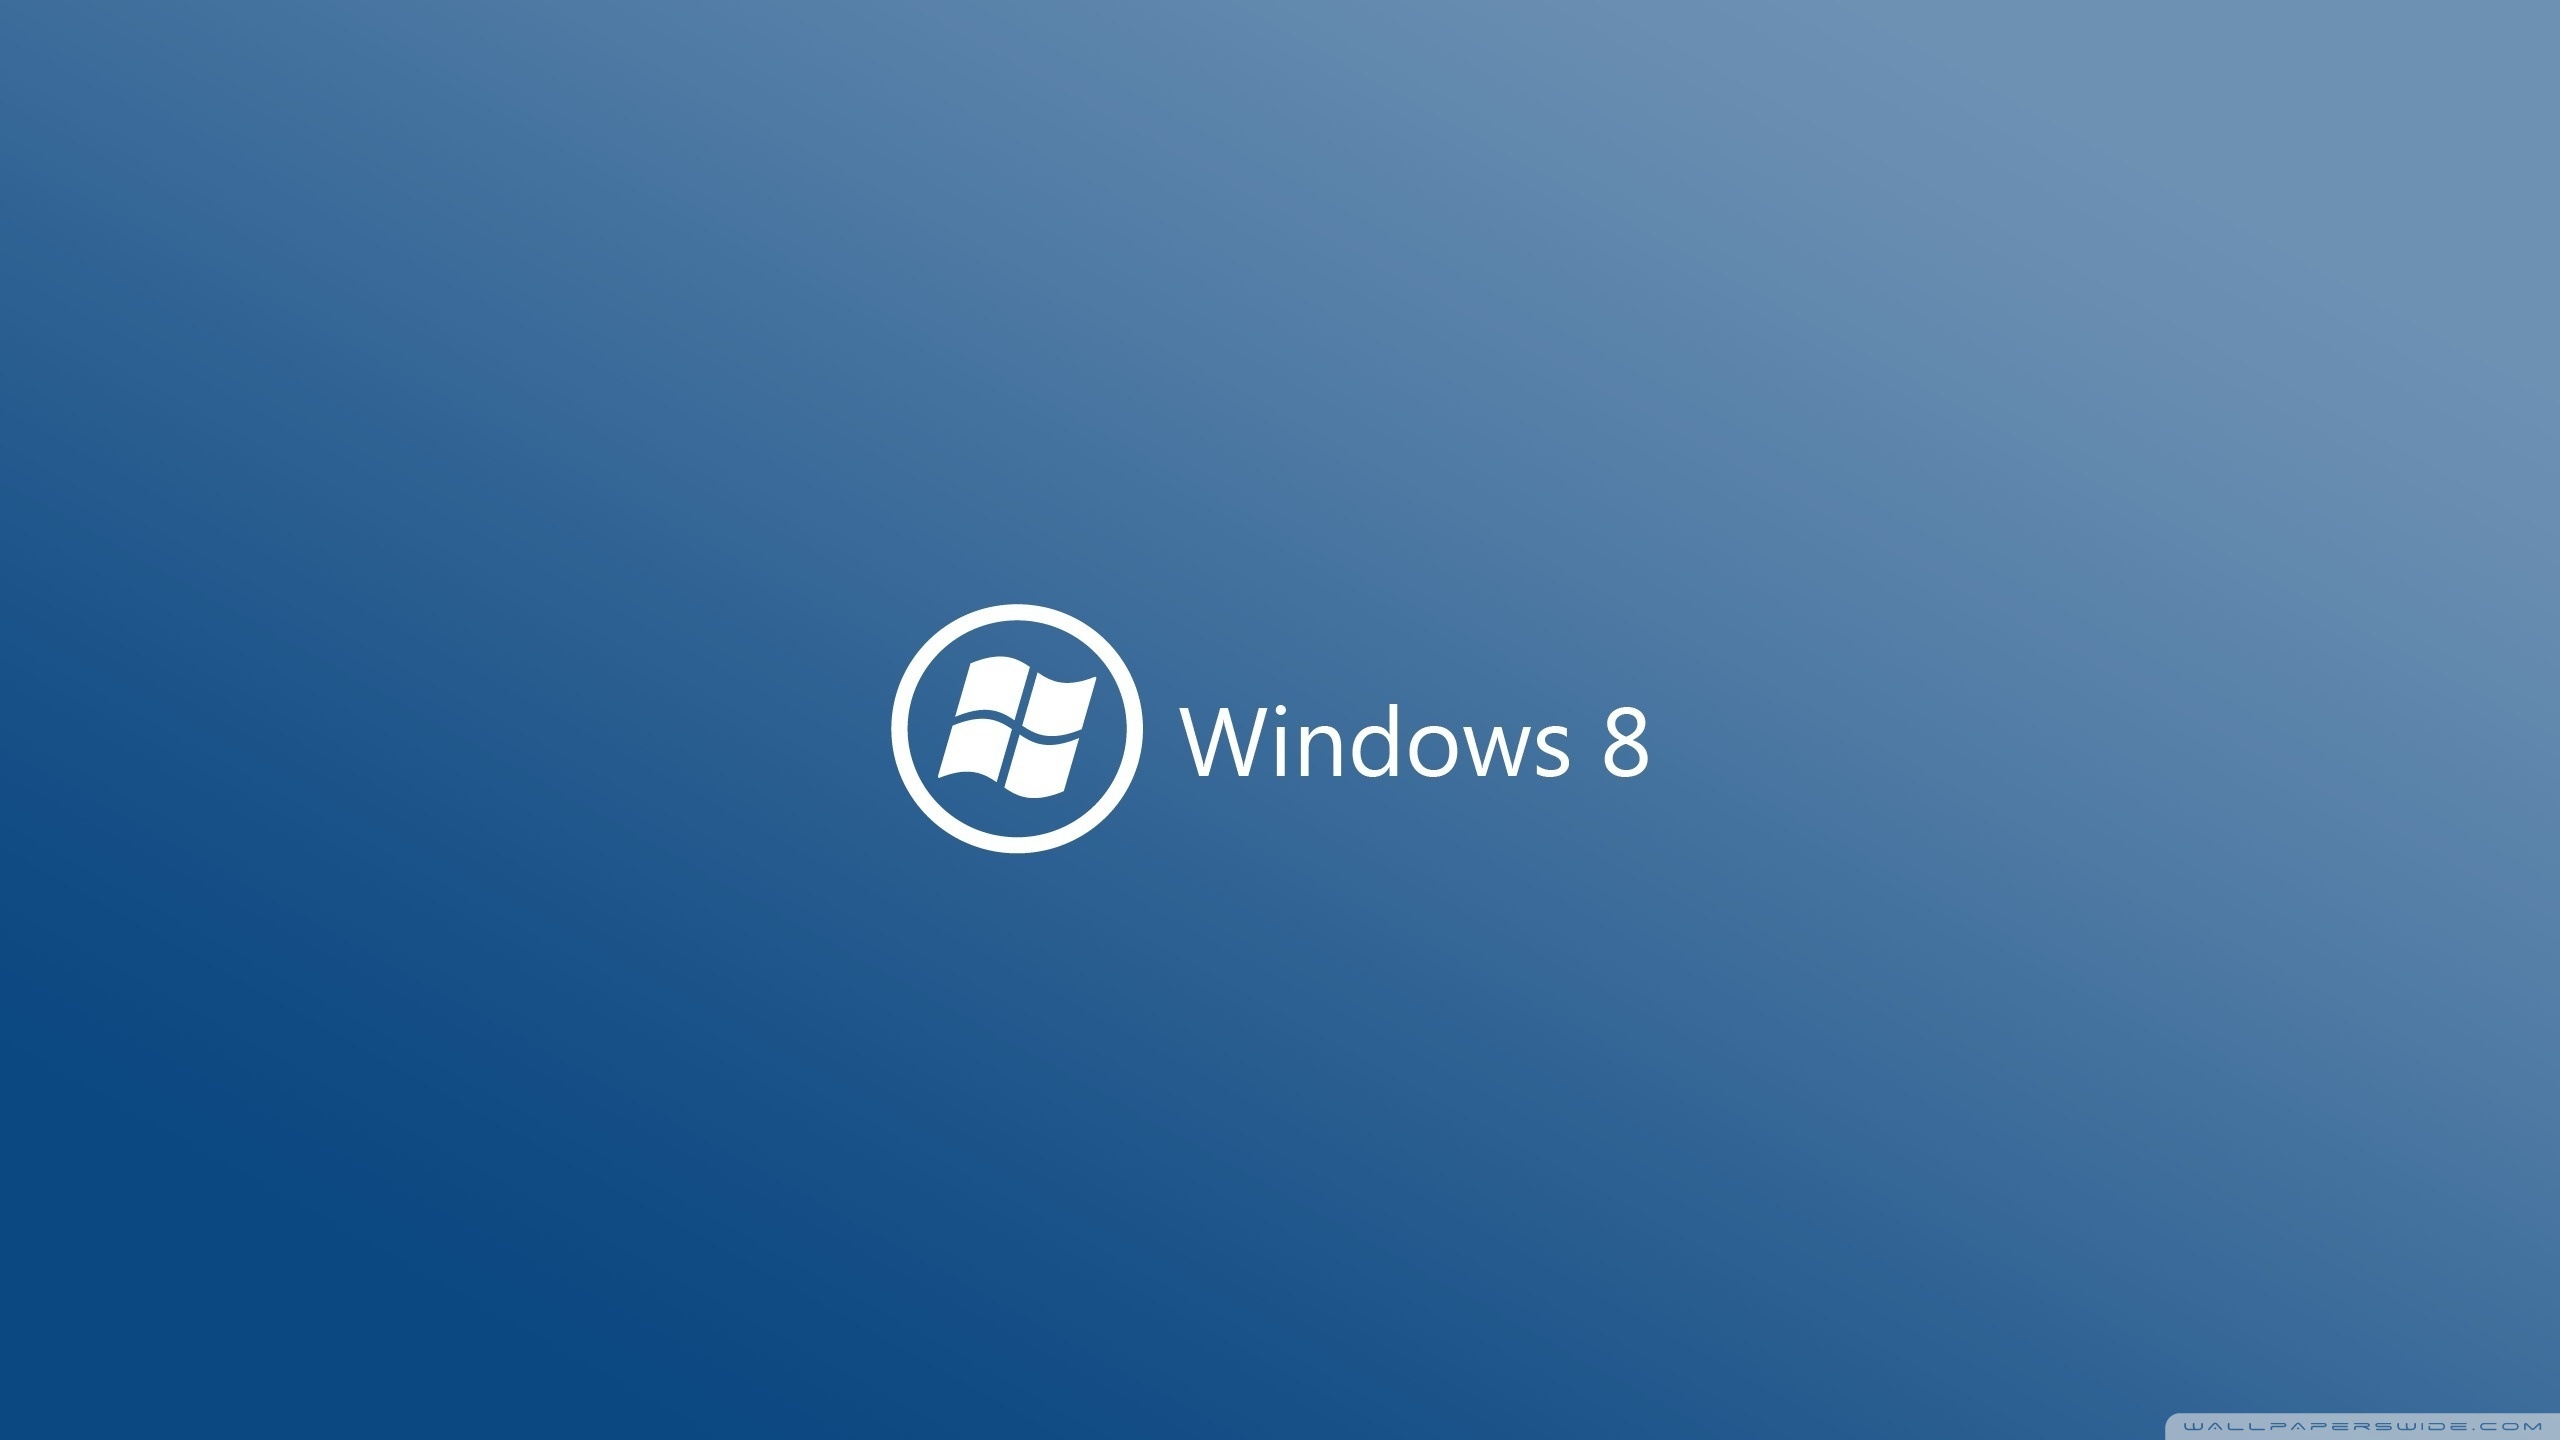 Windows Blue Minmal Theme Wallpaper And Image